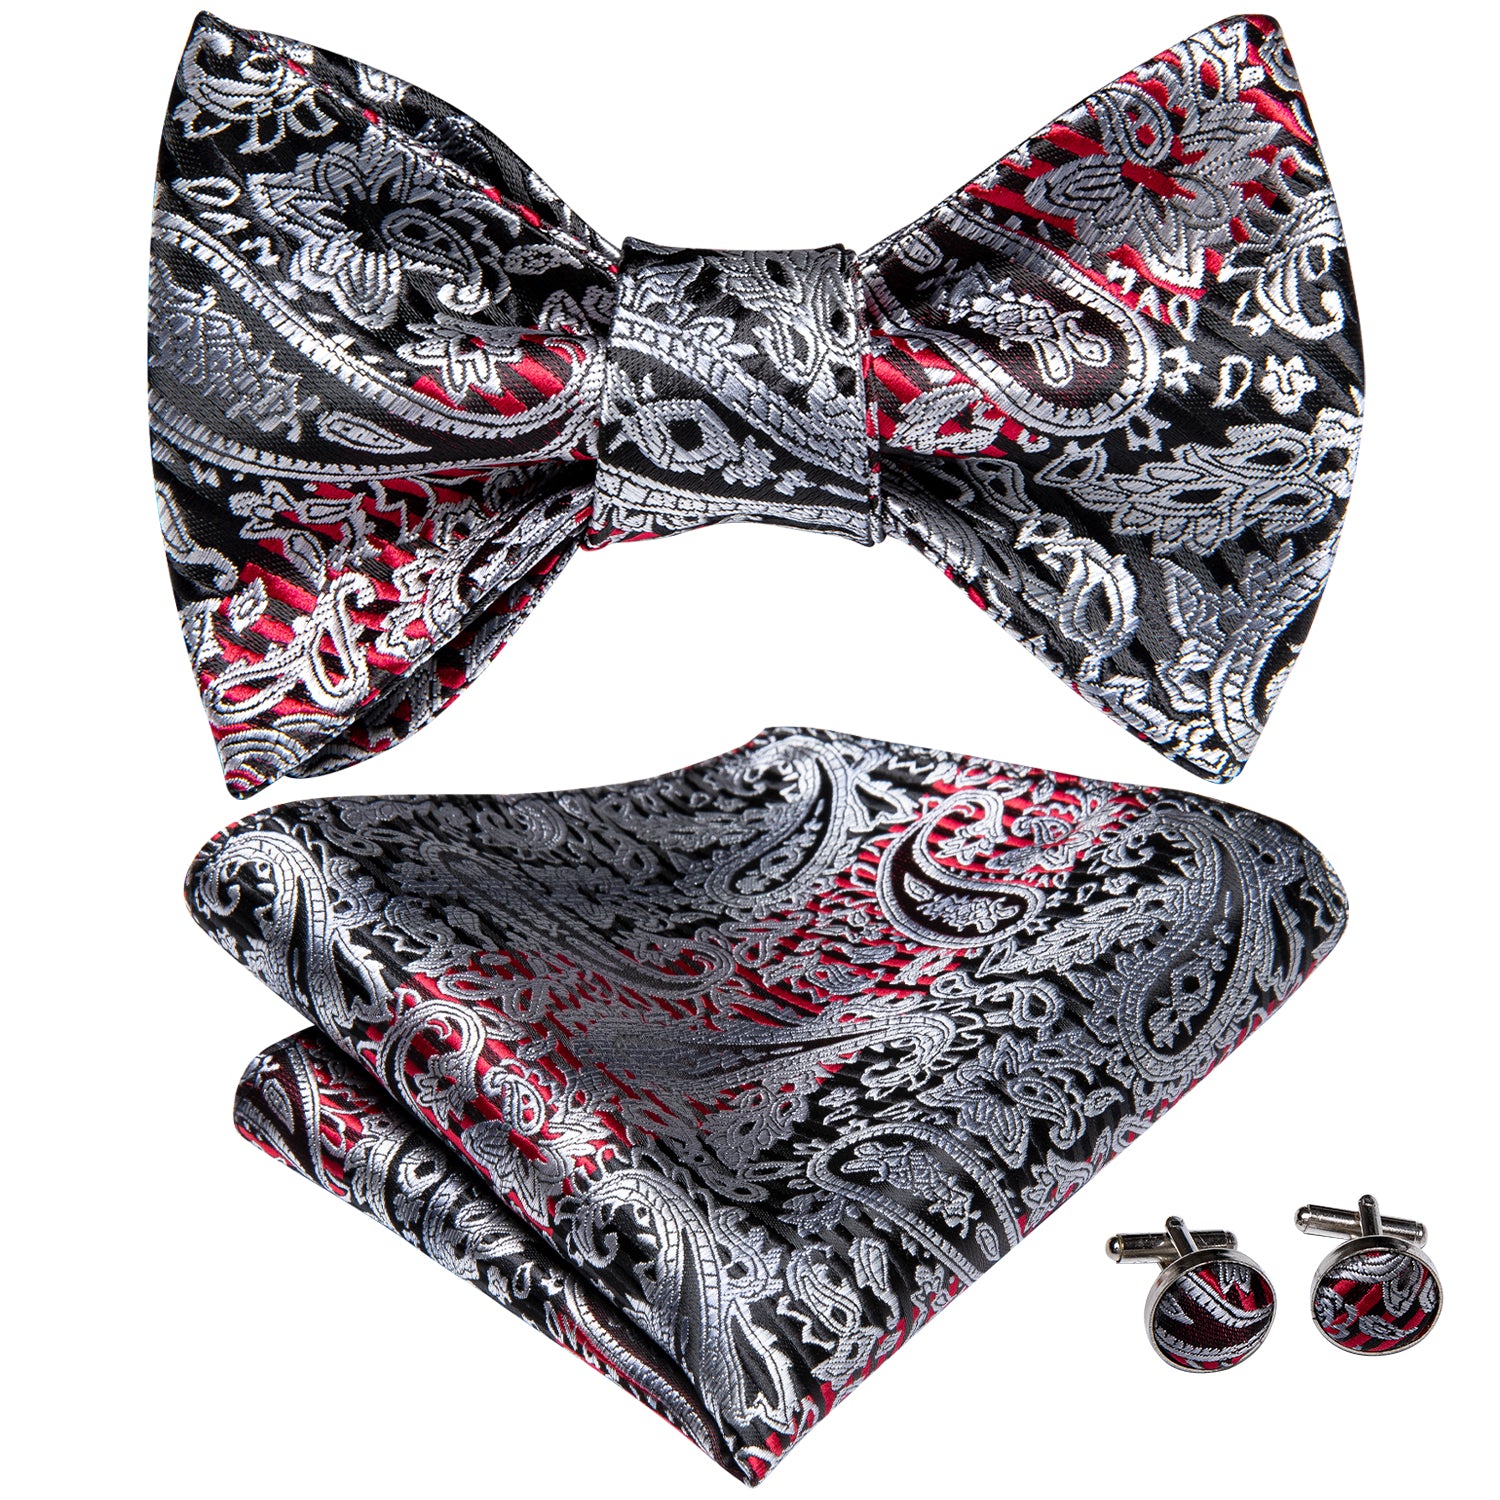 Black Red Silver Paisley Self-tied Bow Tie Pocket Square Cufflinks Set